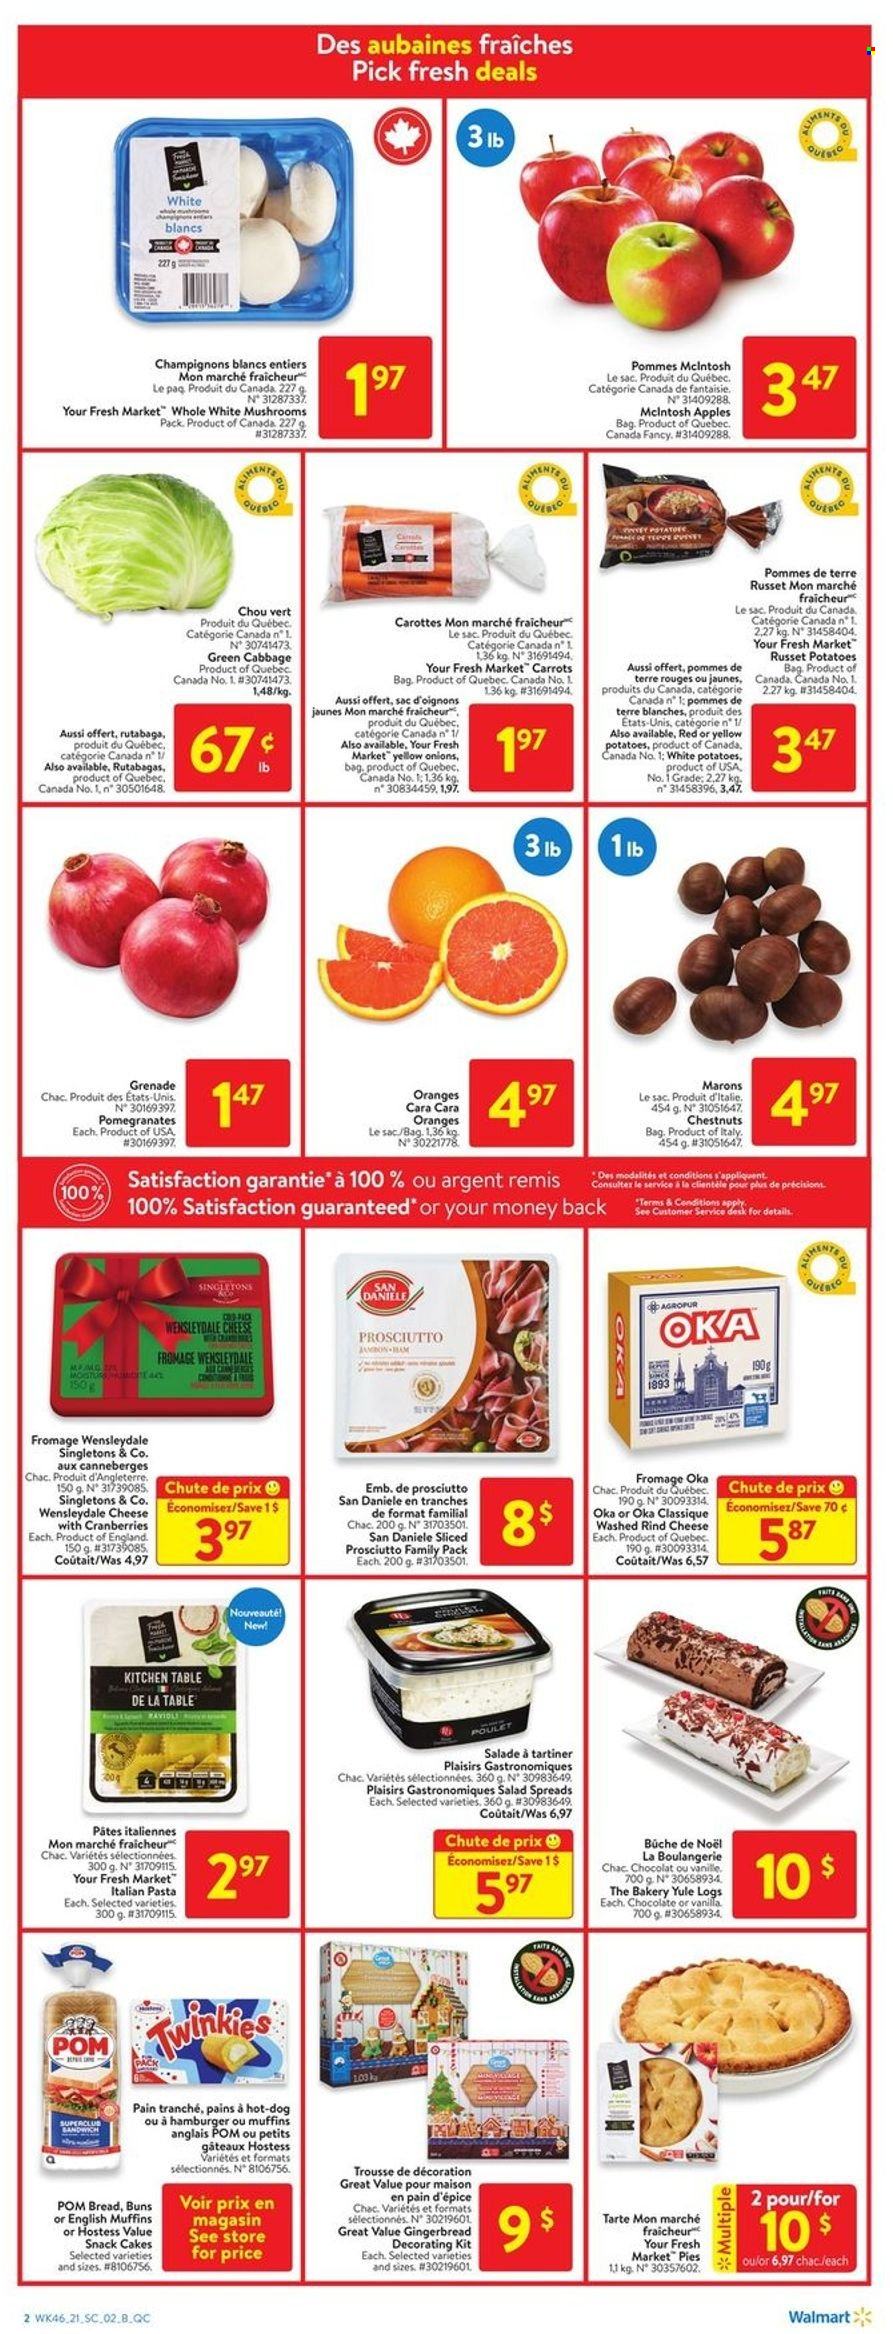 thumbnail - Walmart Flyer - December 09, 2021 - December 15, 2021 - Sales products - mushrooms, english muffins, cake, buns, gingerbread, cabbage, carrots, russet potatoes, potatoes, salad, pomegranate, hamburger, pasta, prosciutto, Wensleydale, cheese, chocolate, snack, cranberries, chestnuts, table, kitchen table, desk, rutabaga, oranges. Page 2.